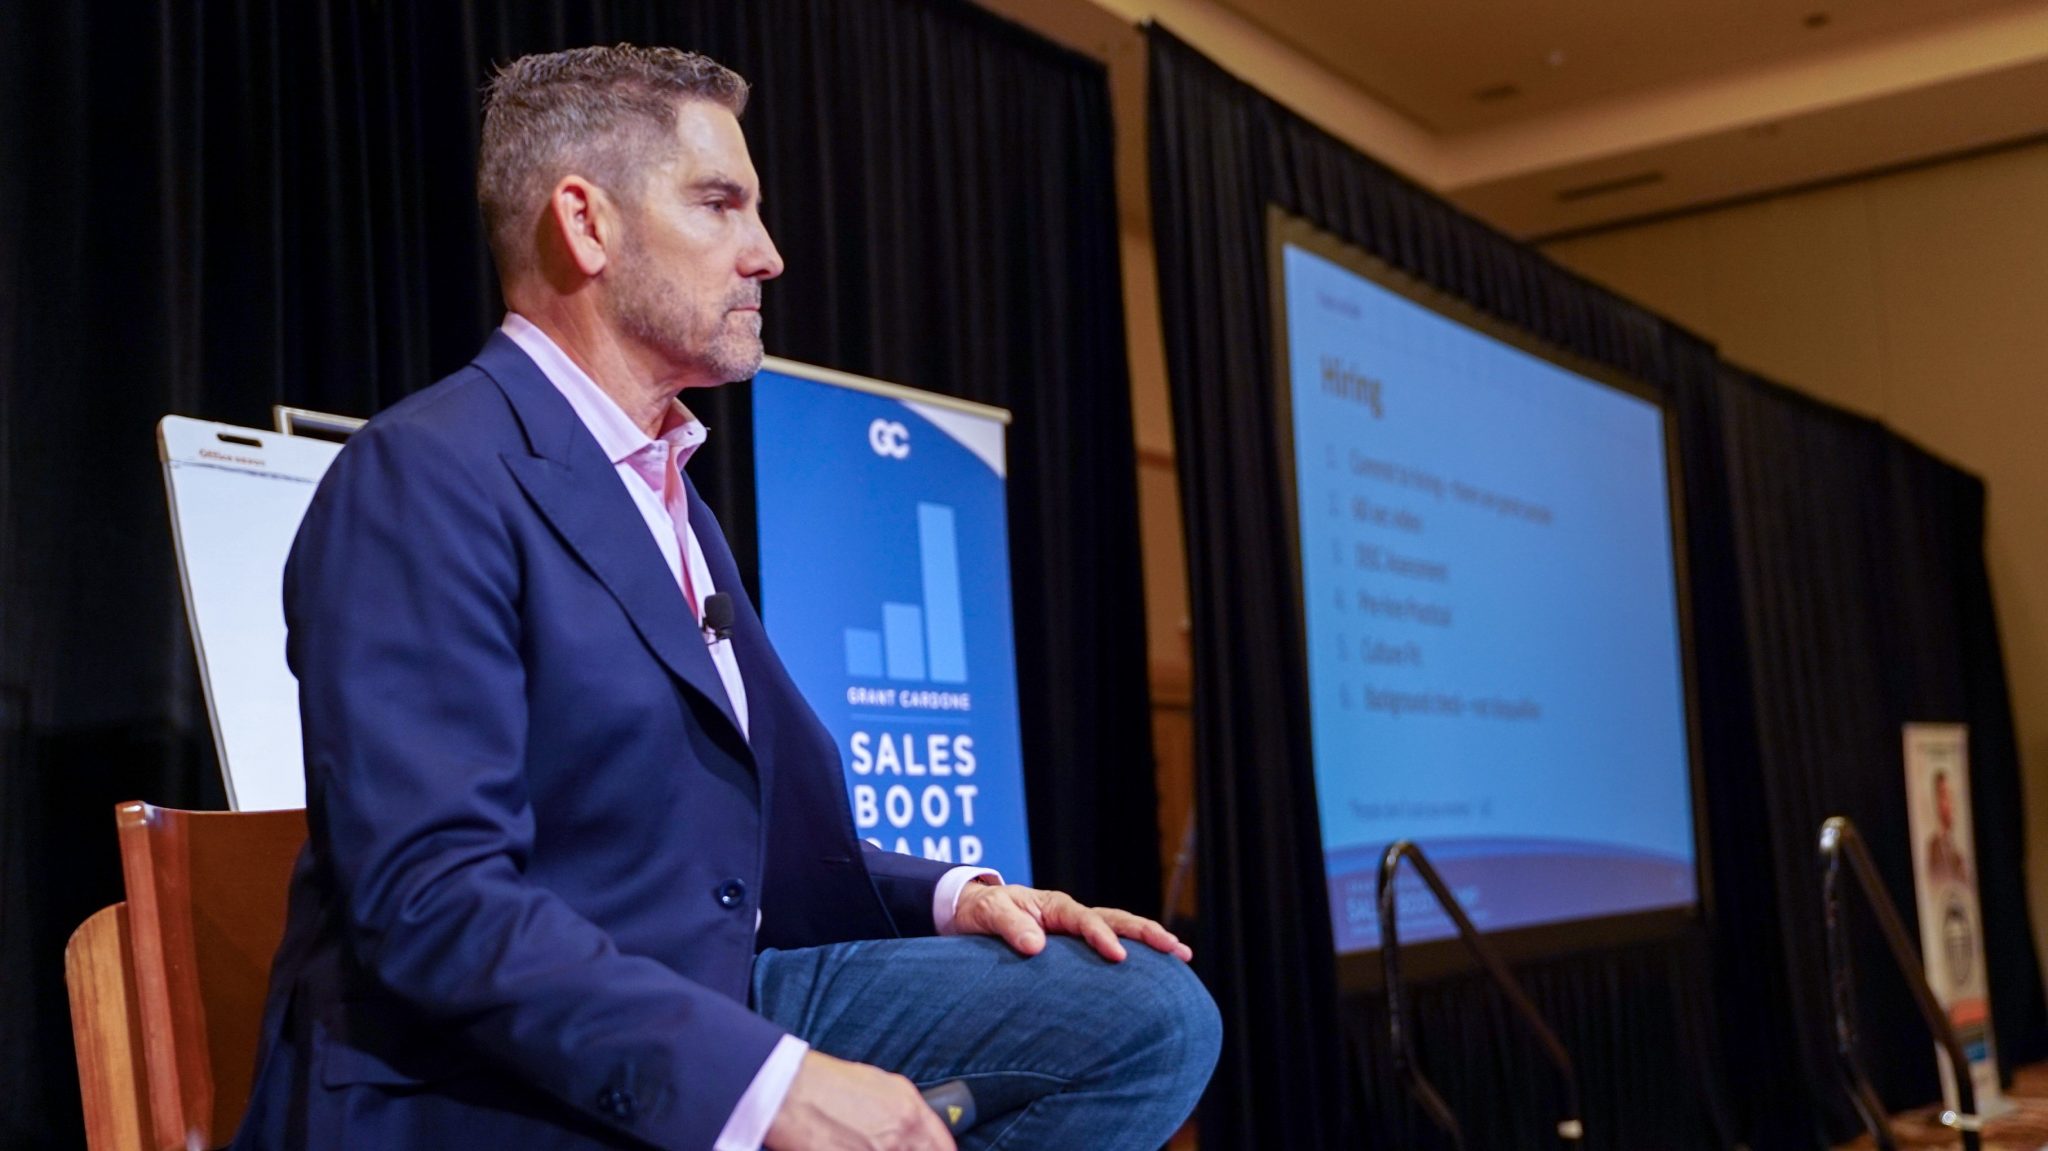 Grant Cardone Launches Number One Sales Training Program Worldwide - Grant Cardone - 10X Your ...